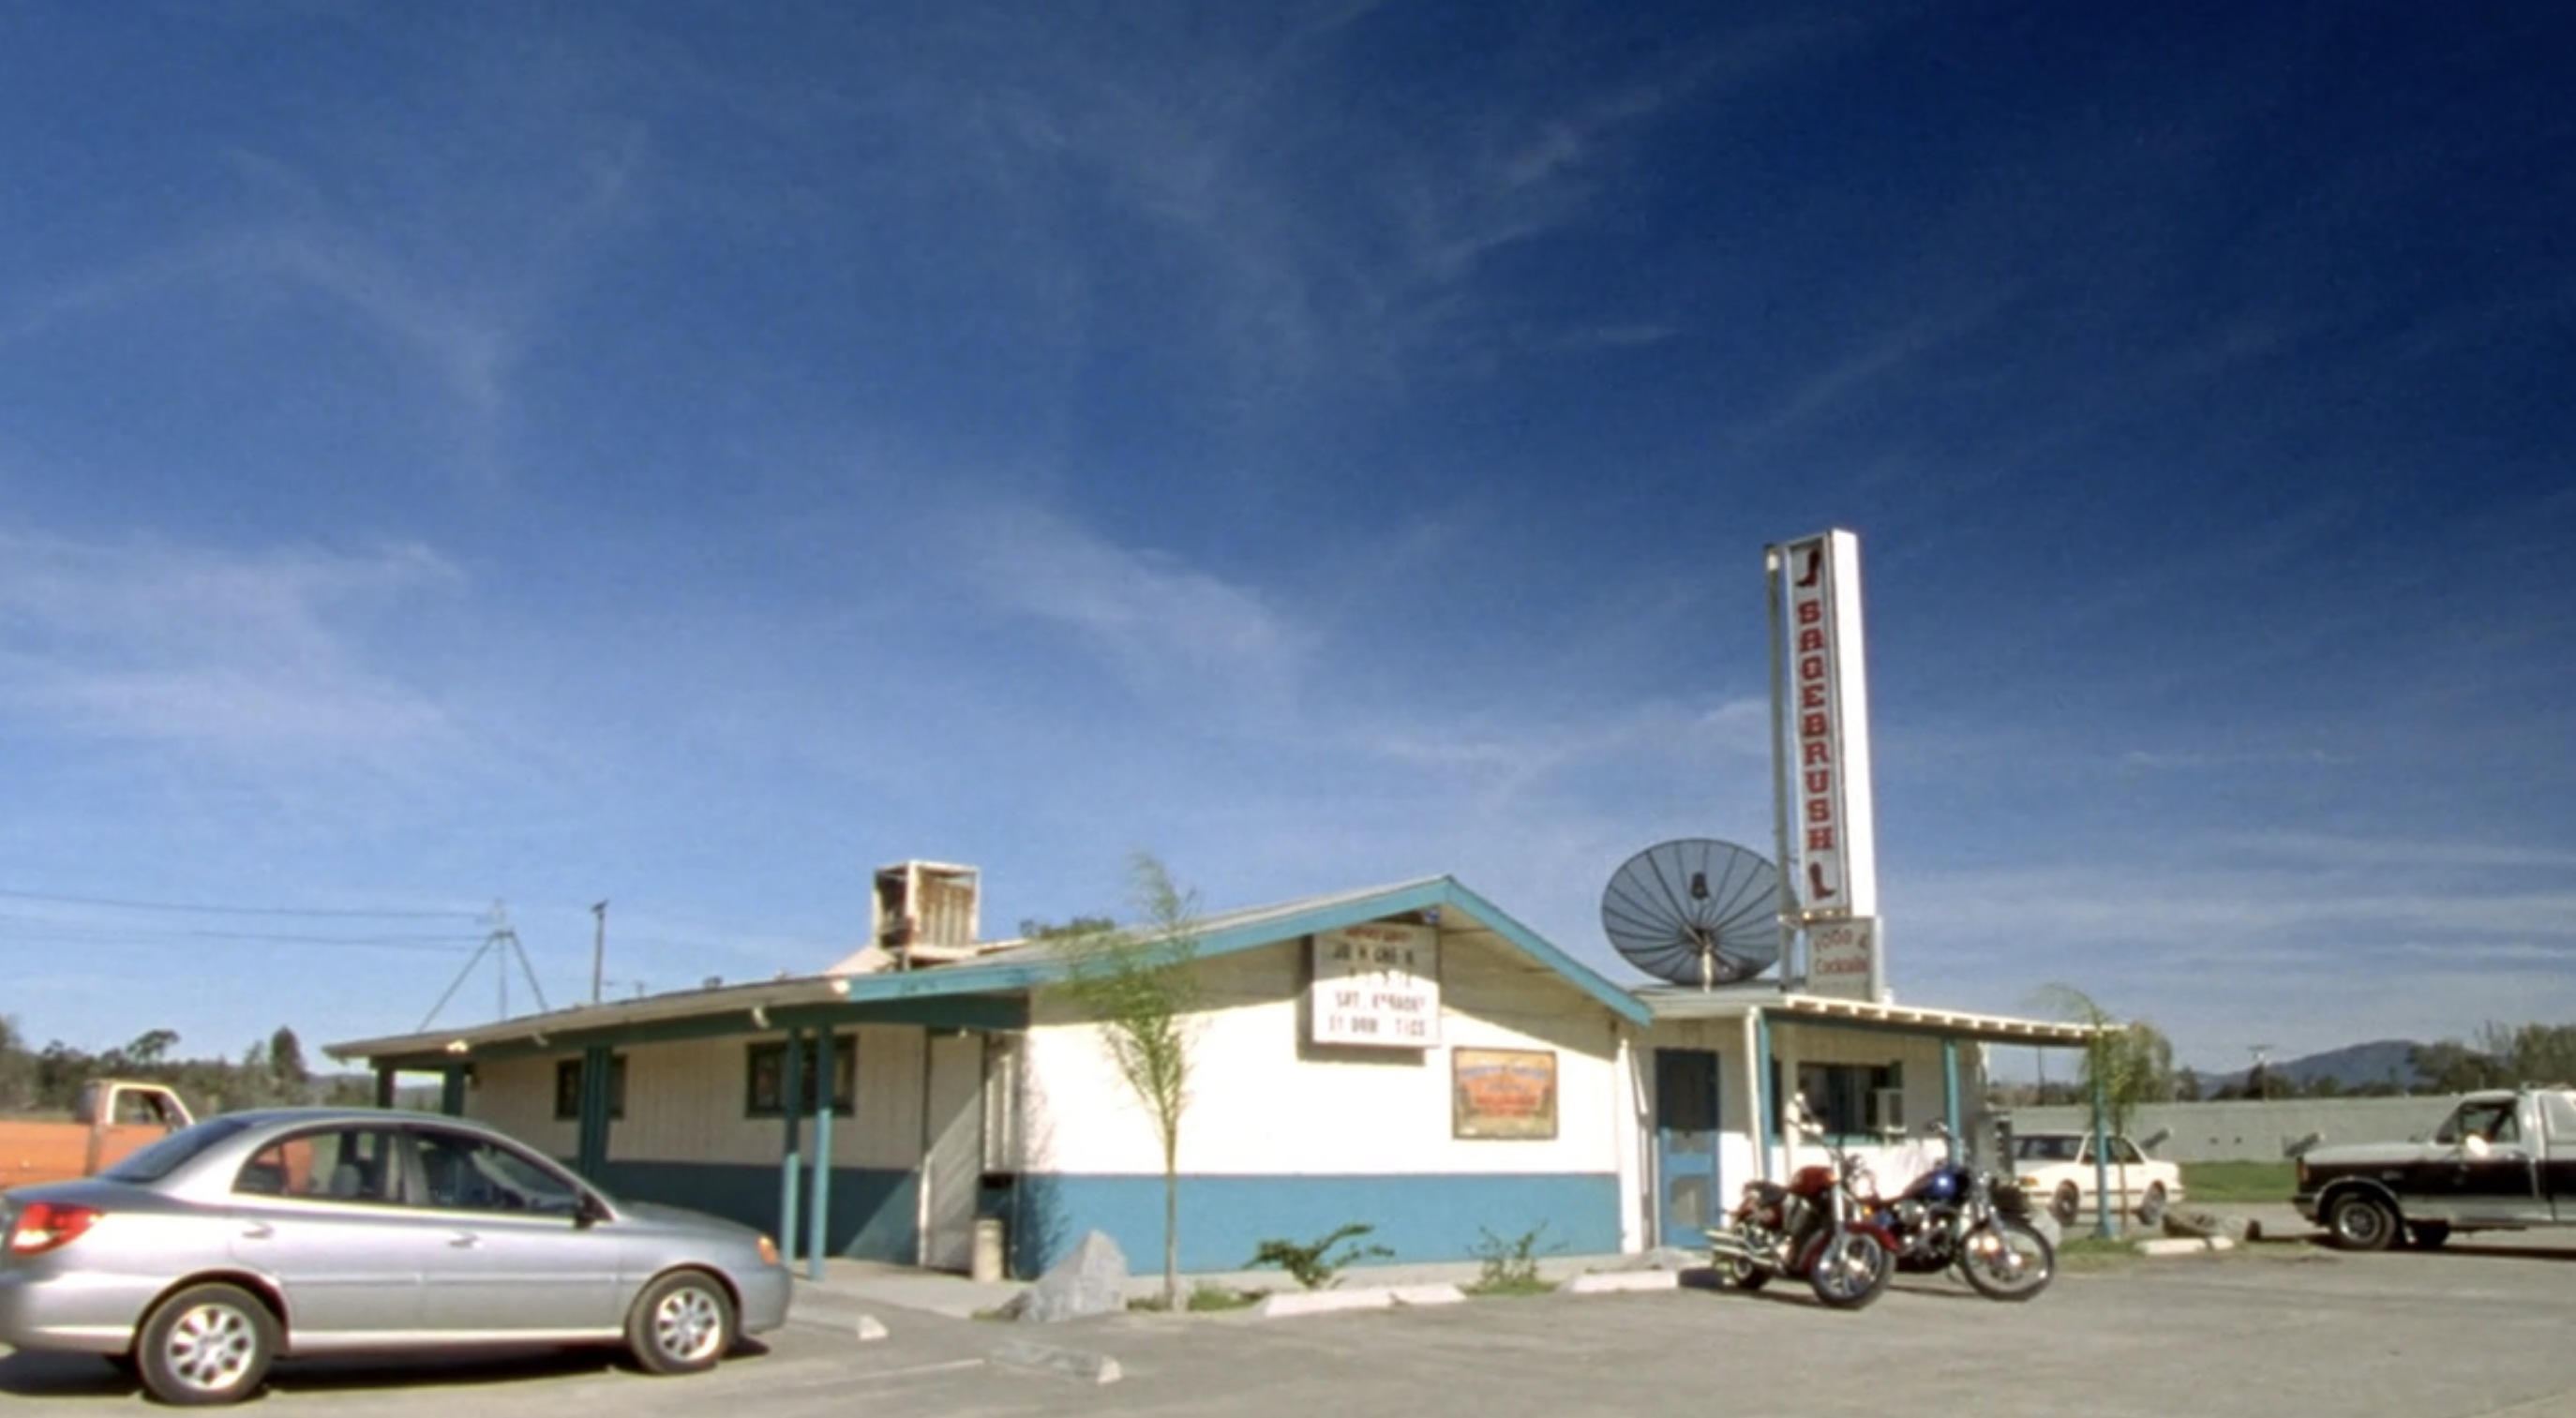 Screenshot from Veronica Mars S1E15. The Sagebrush Cantina, a low white building with blue trim. Two motorcycles are parked outside.